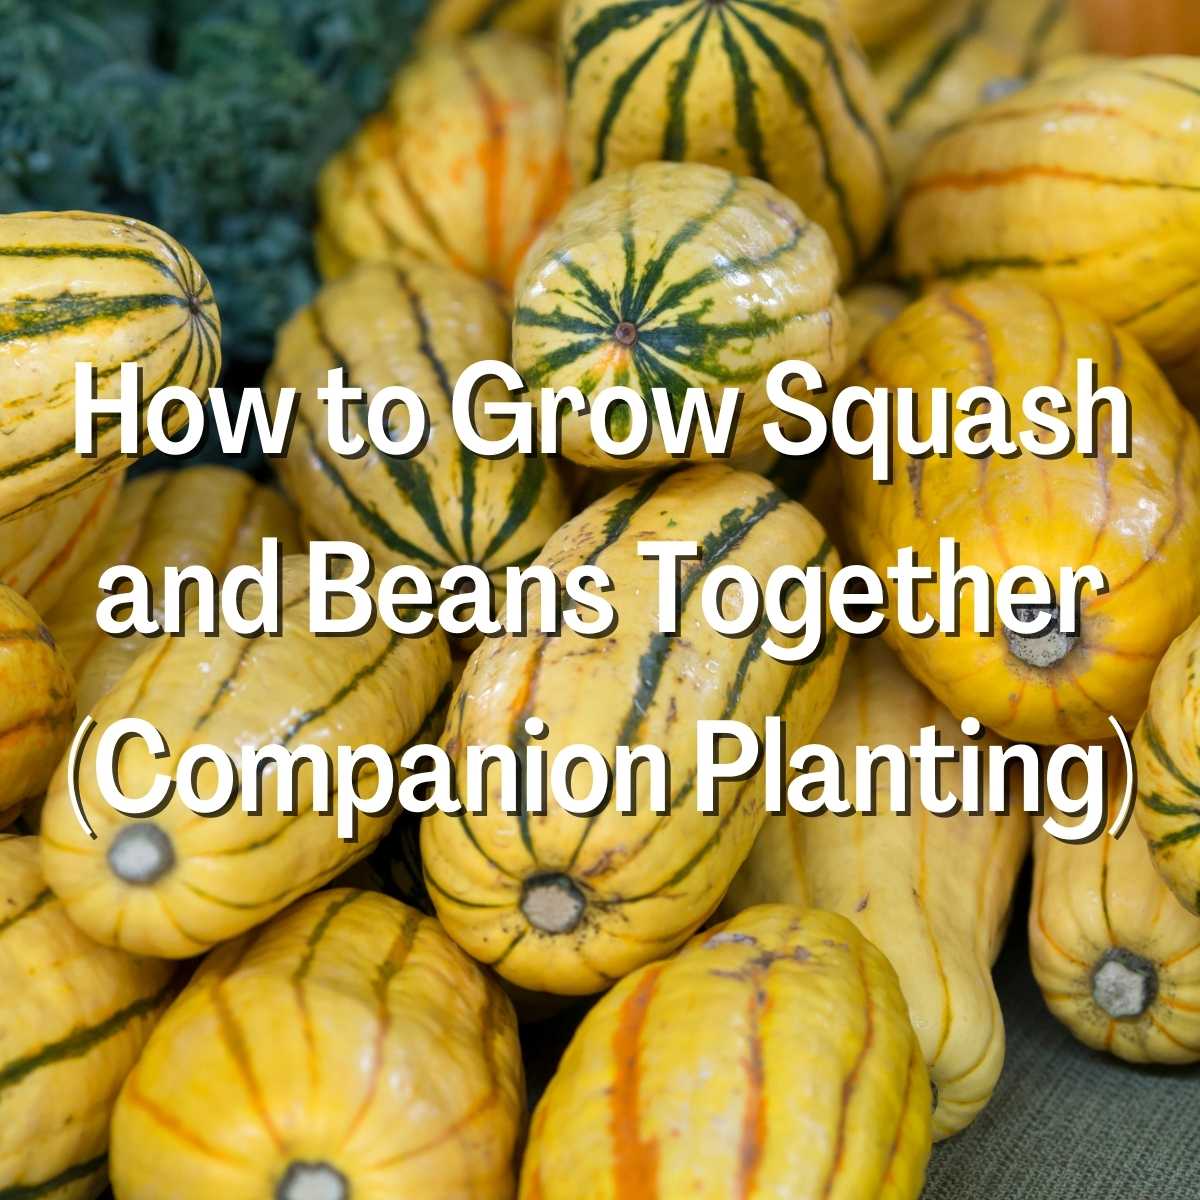 How to Grow Squash and Beans Together